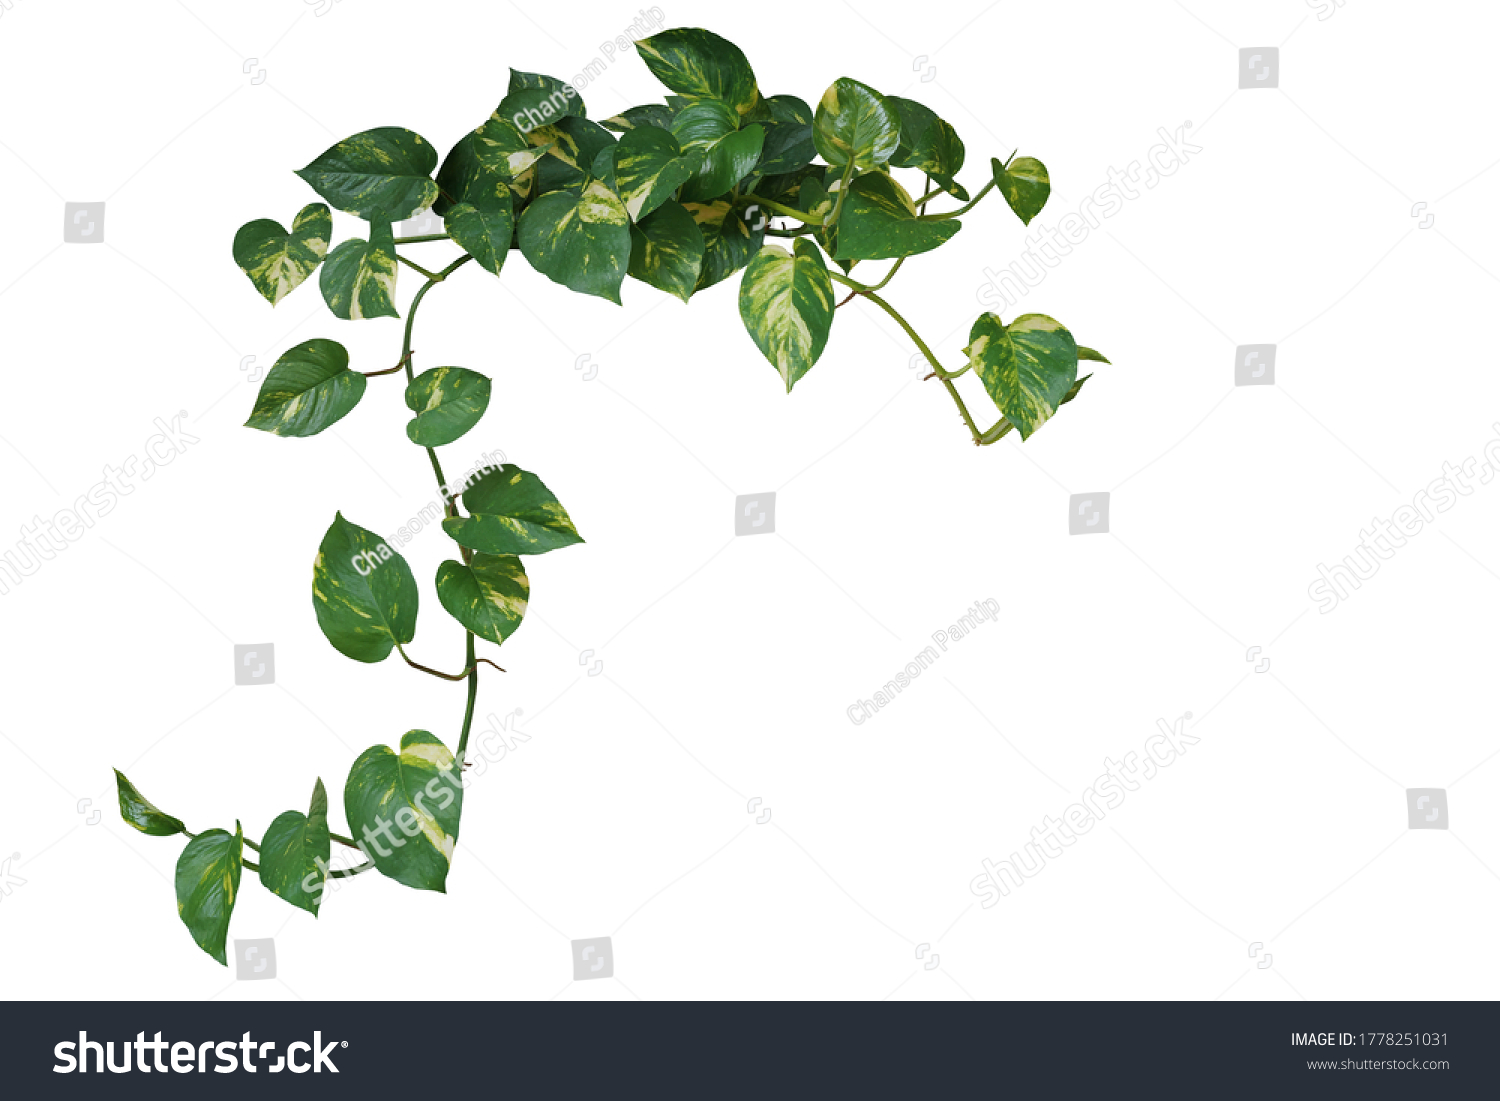 Heart shaped green variegated leave hanging vine plant of devil’s ivy or golden pothos (Epipremnum aureum) popular foliage tropical houseplant isolated on white with clipping path. #1778251031